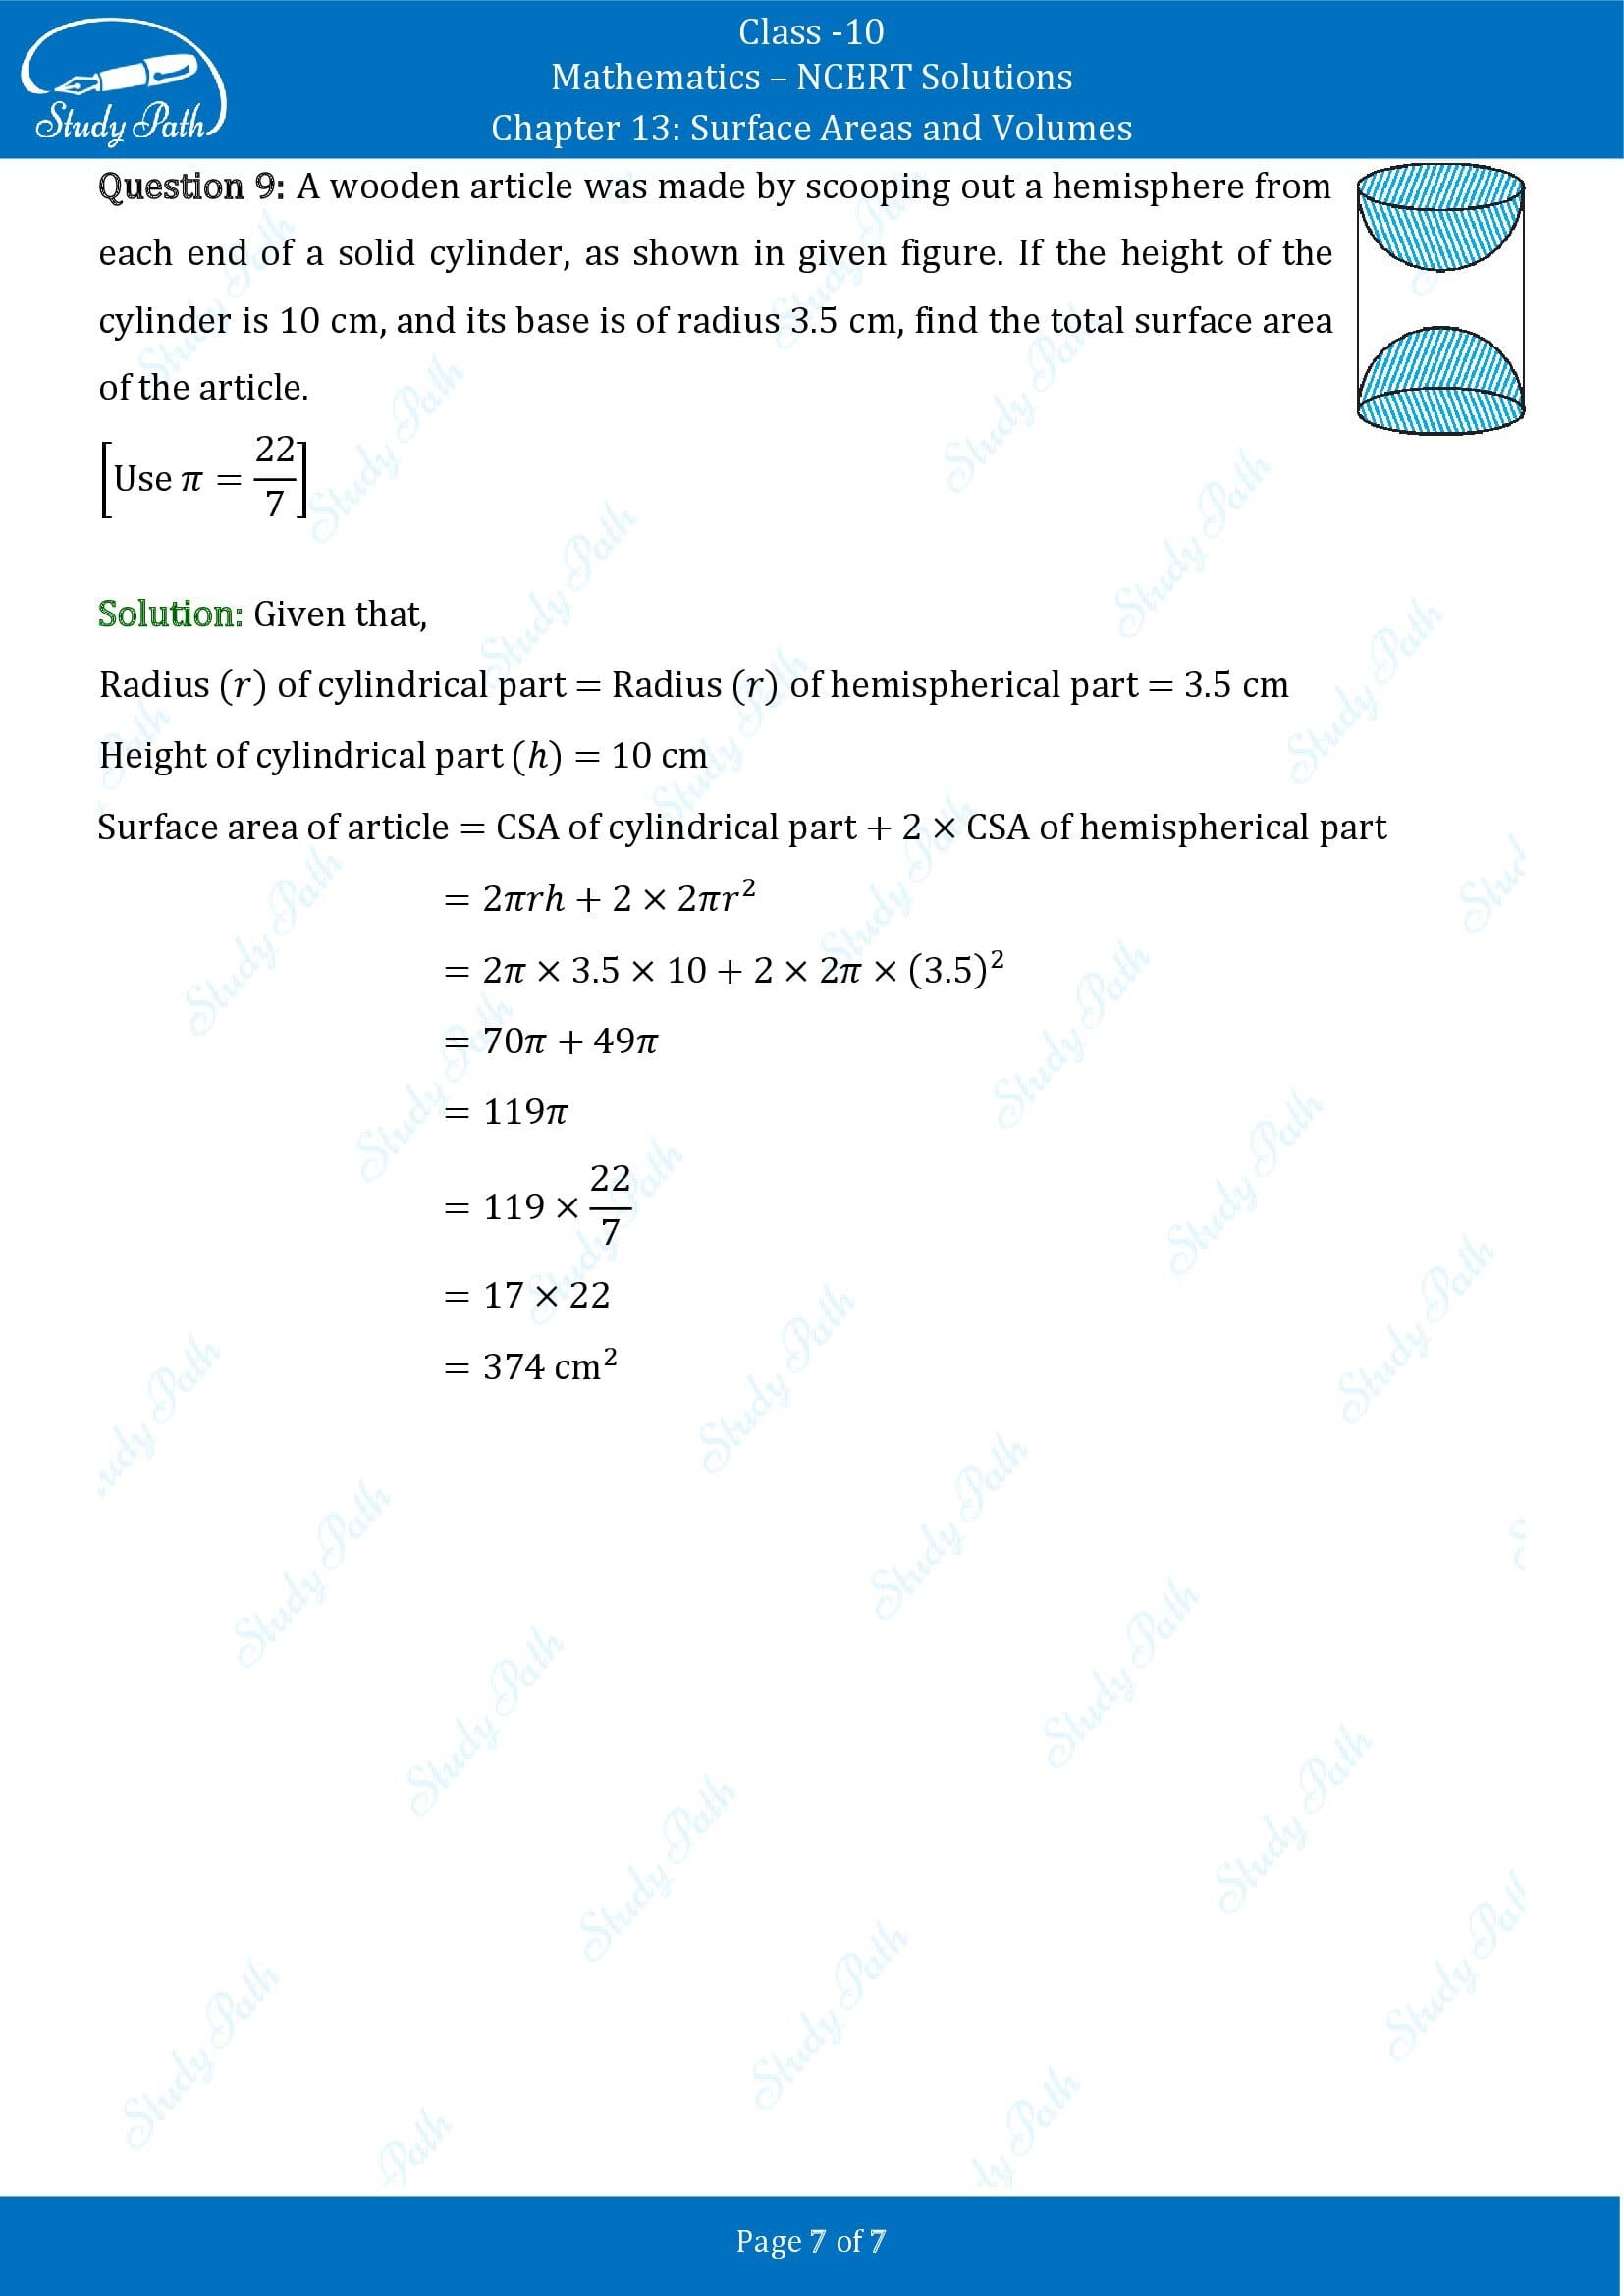 NCERT Solutions for Class 10 Maths Chapter 13 Surface Areas and Volumes Exercise 13.1 00007